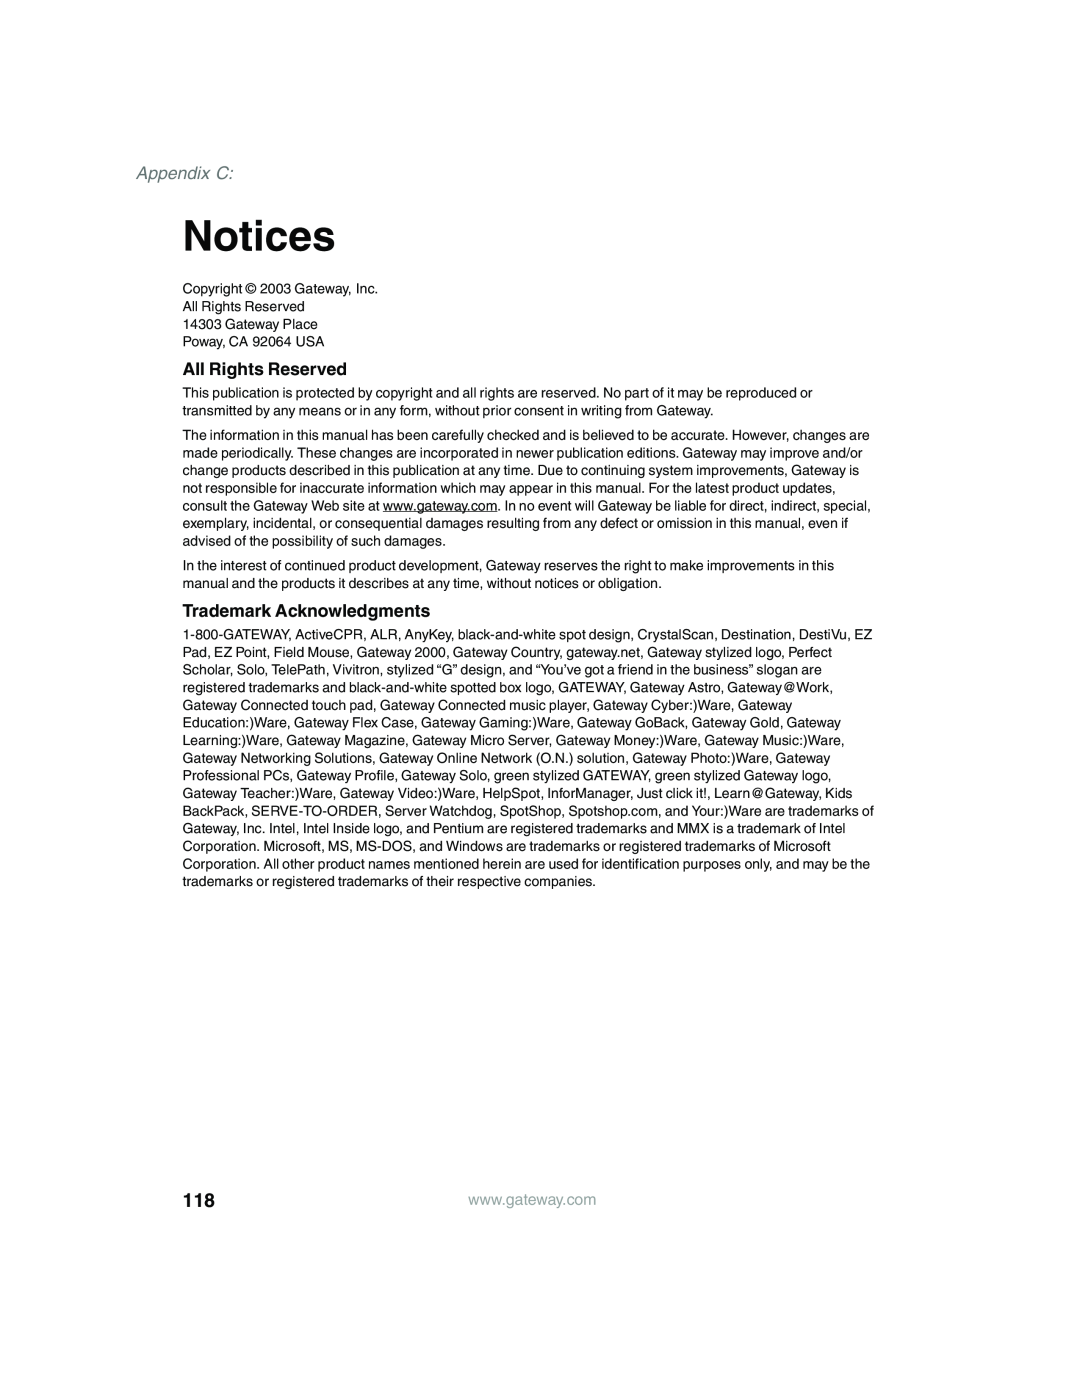 Gateway 980 manual Notices, All Rights Reserved, Trademark Acknowledgments, Appendix C, Poway, CA 92064 USA 